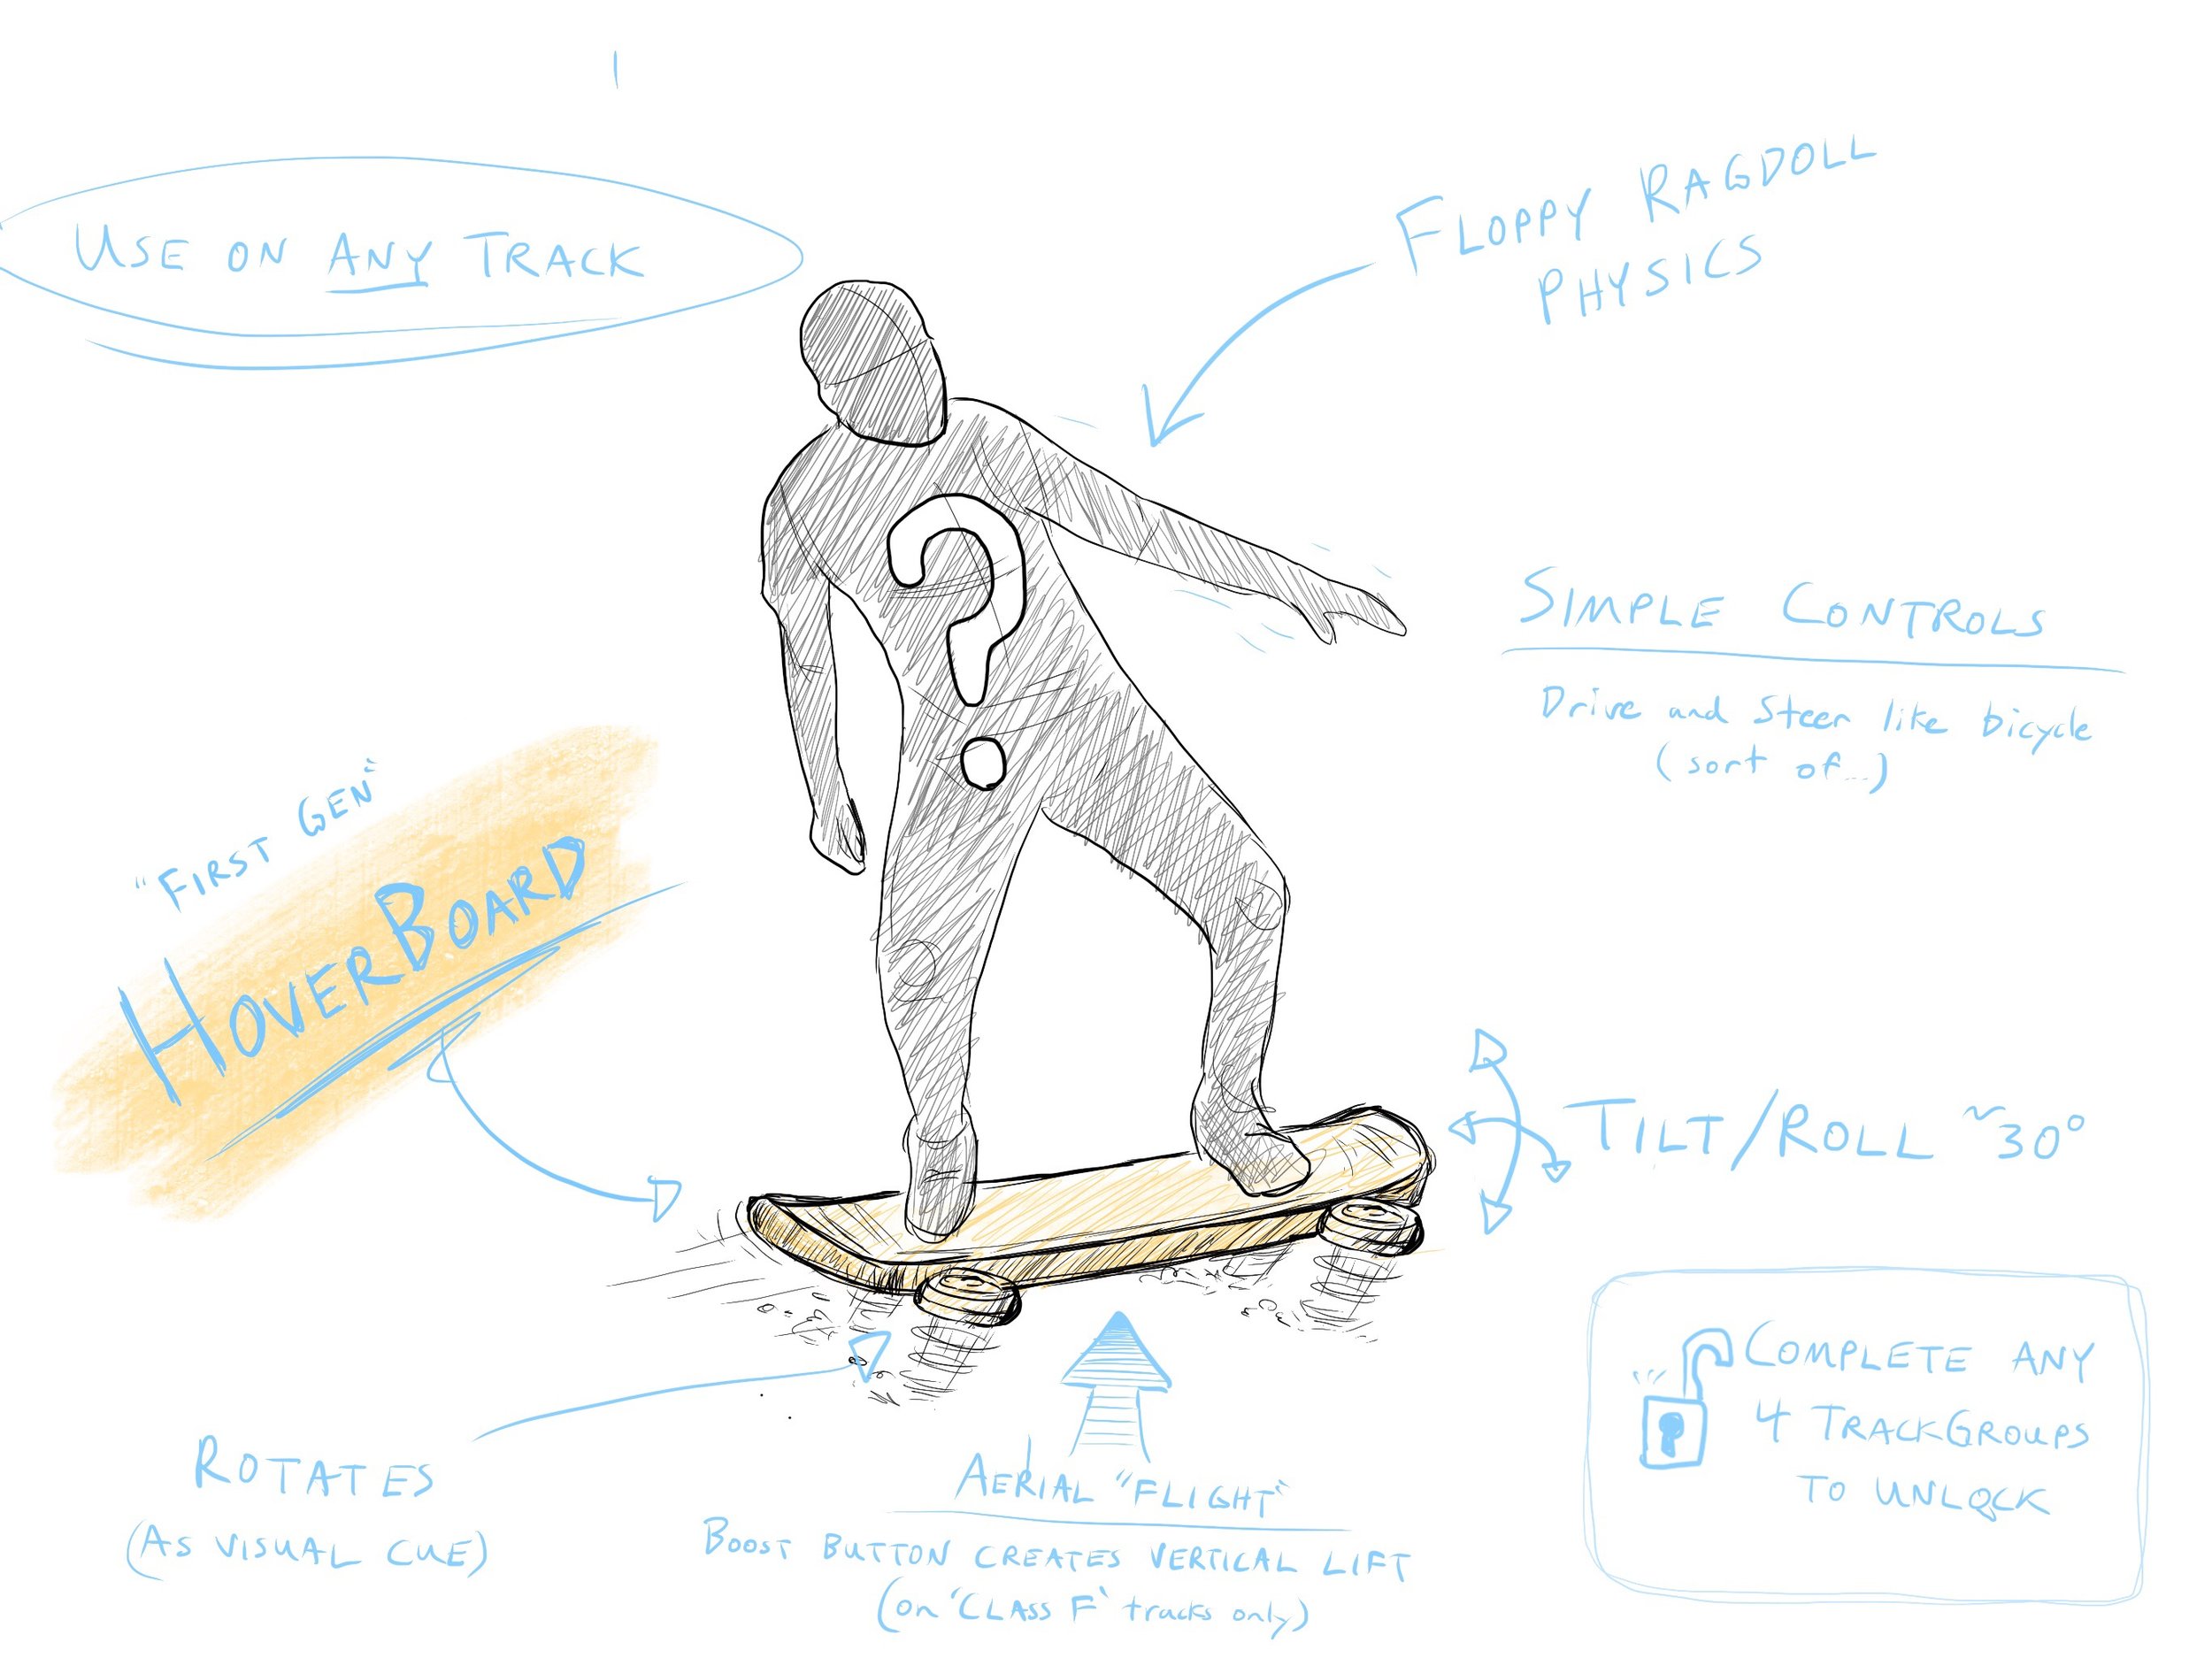 hoverboard drawing